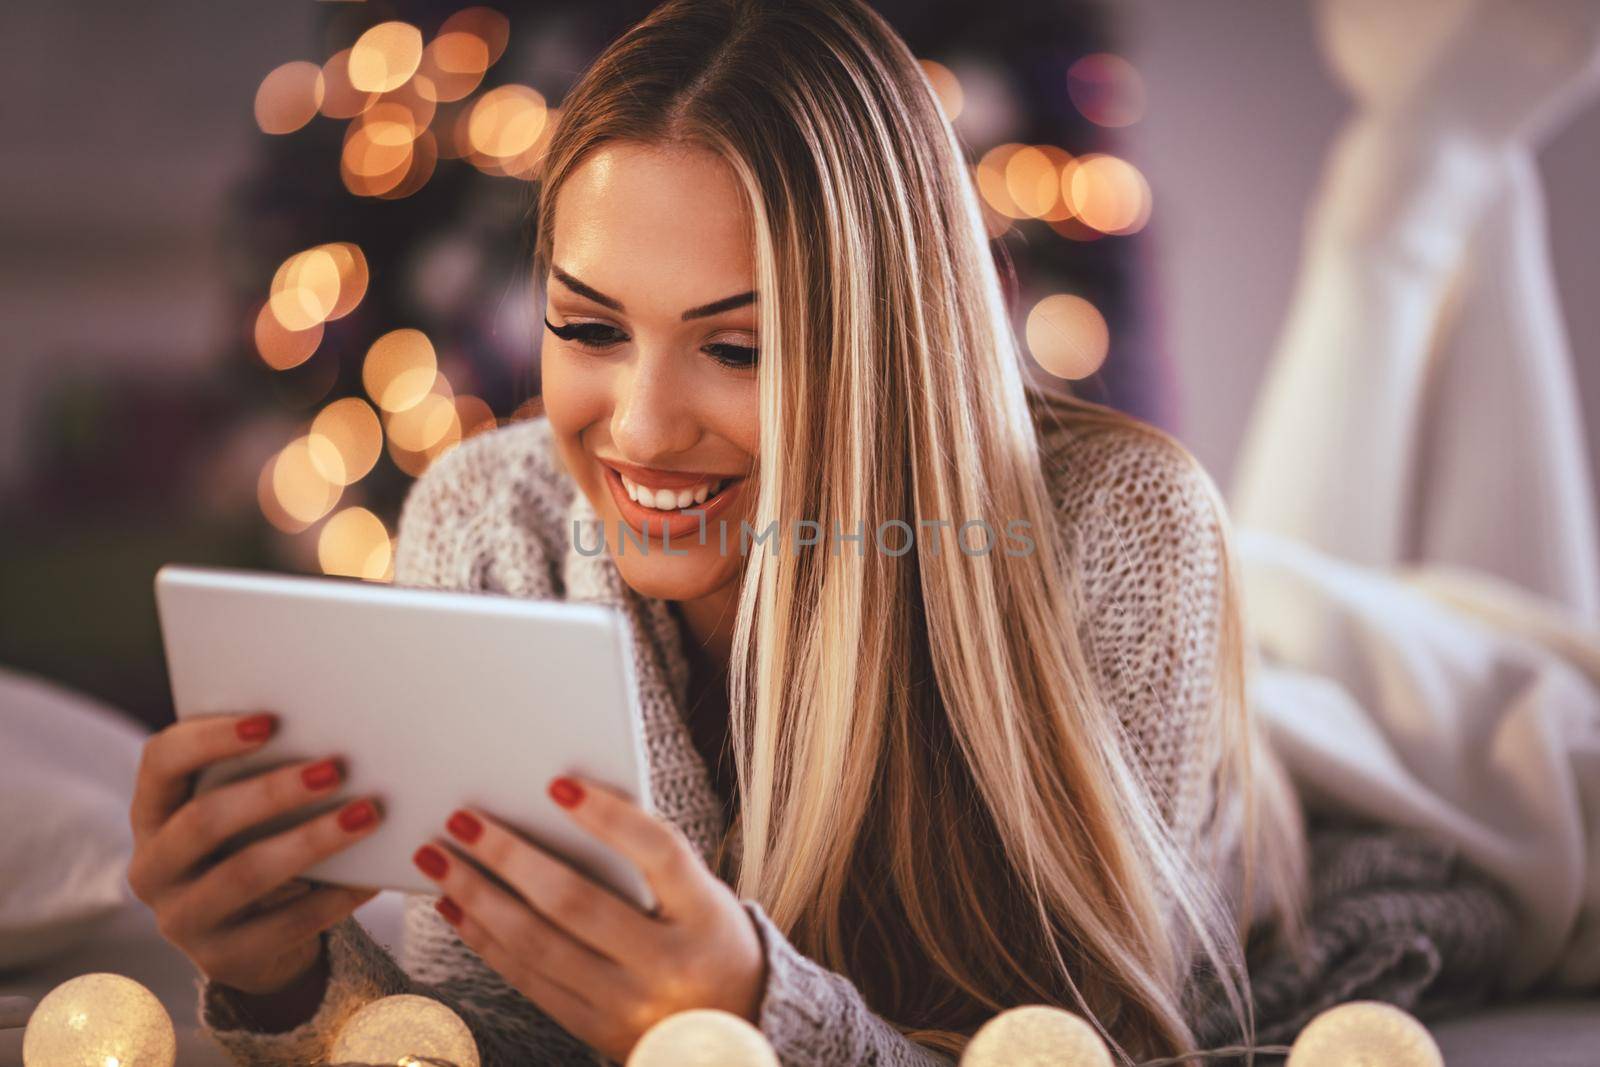 Cute young smiling woman using tablet and happy smiling  during cozy Xmas holidays at home.